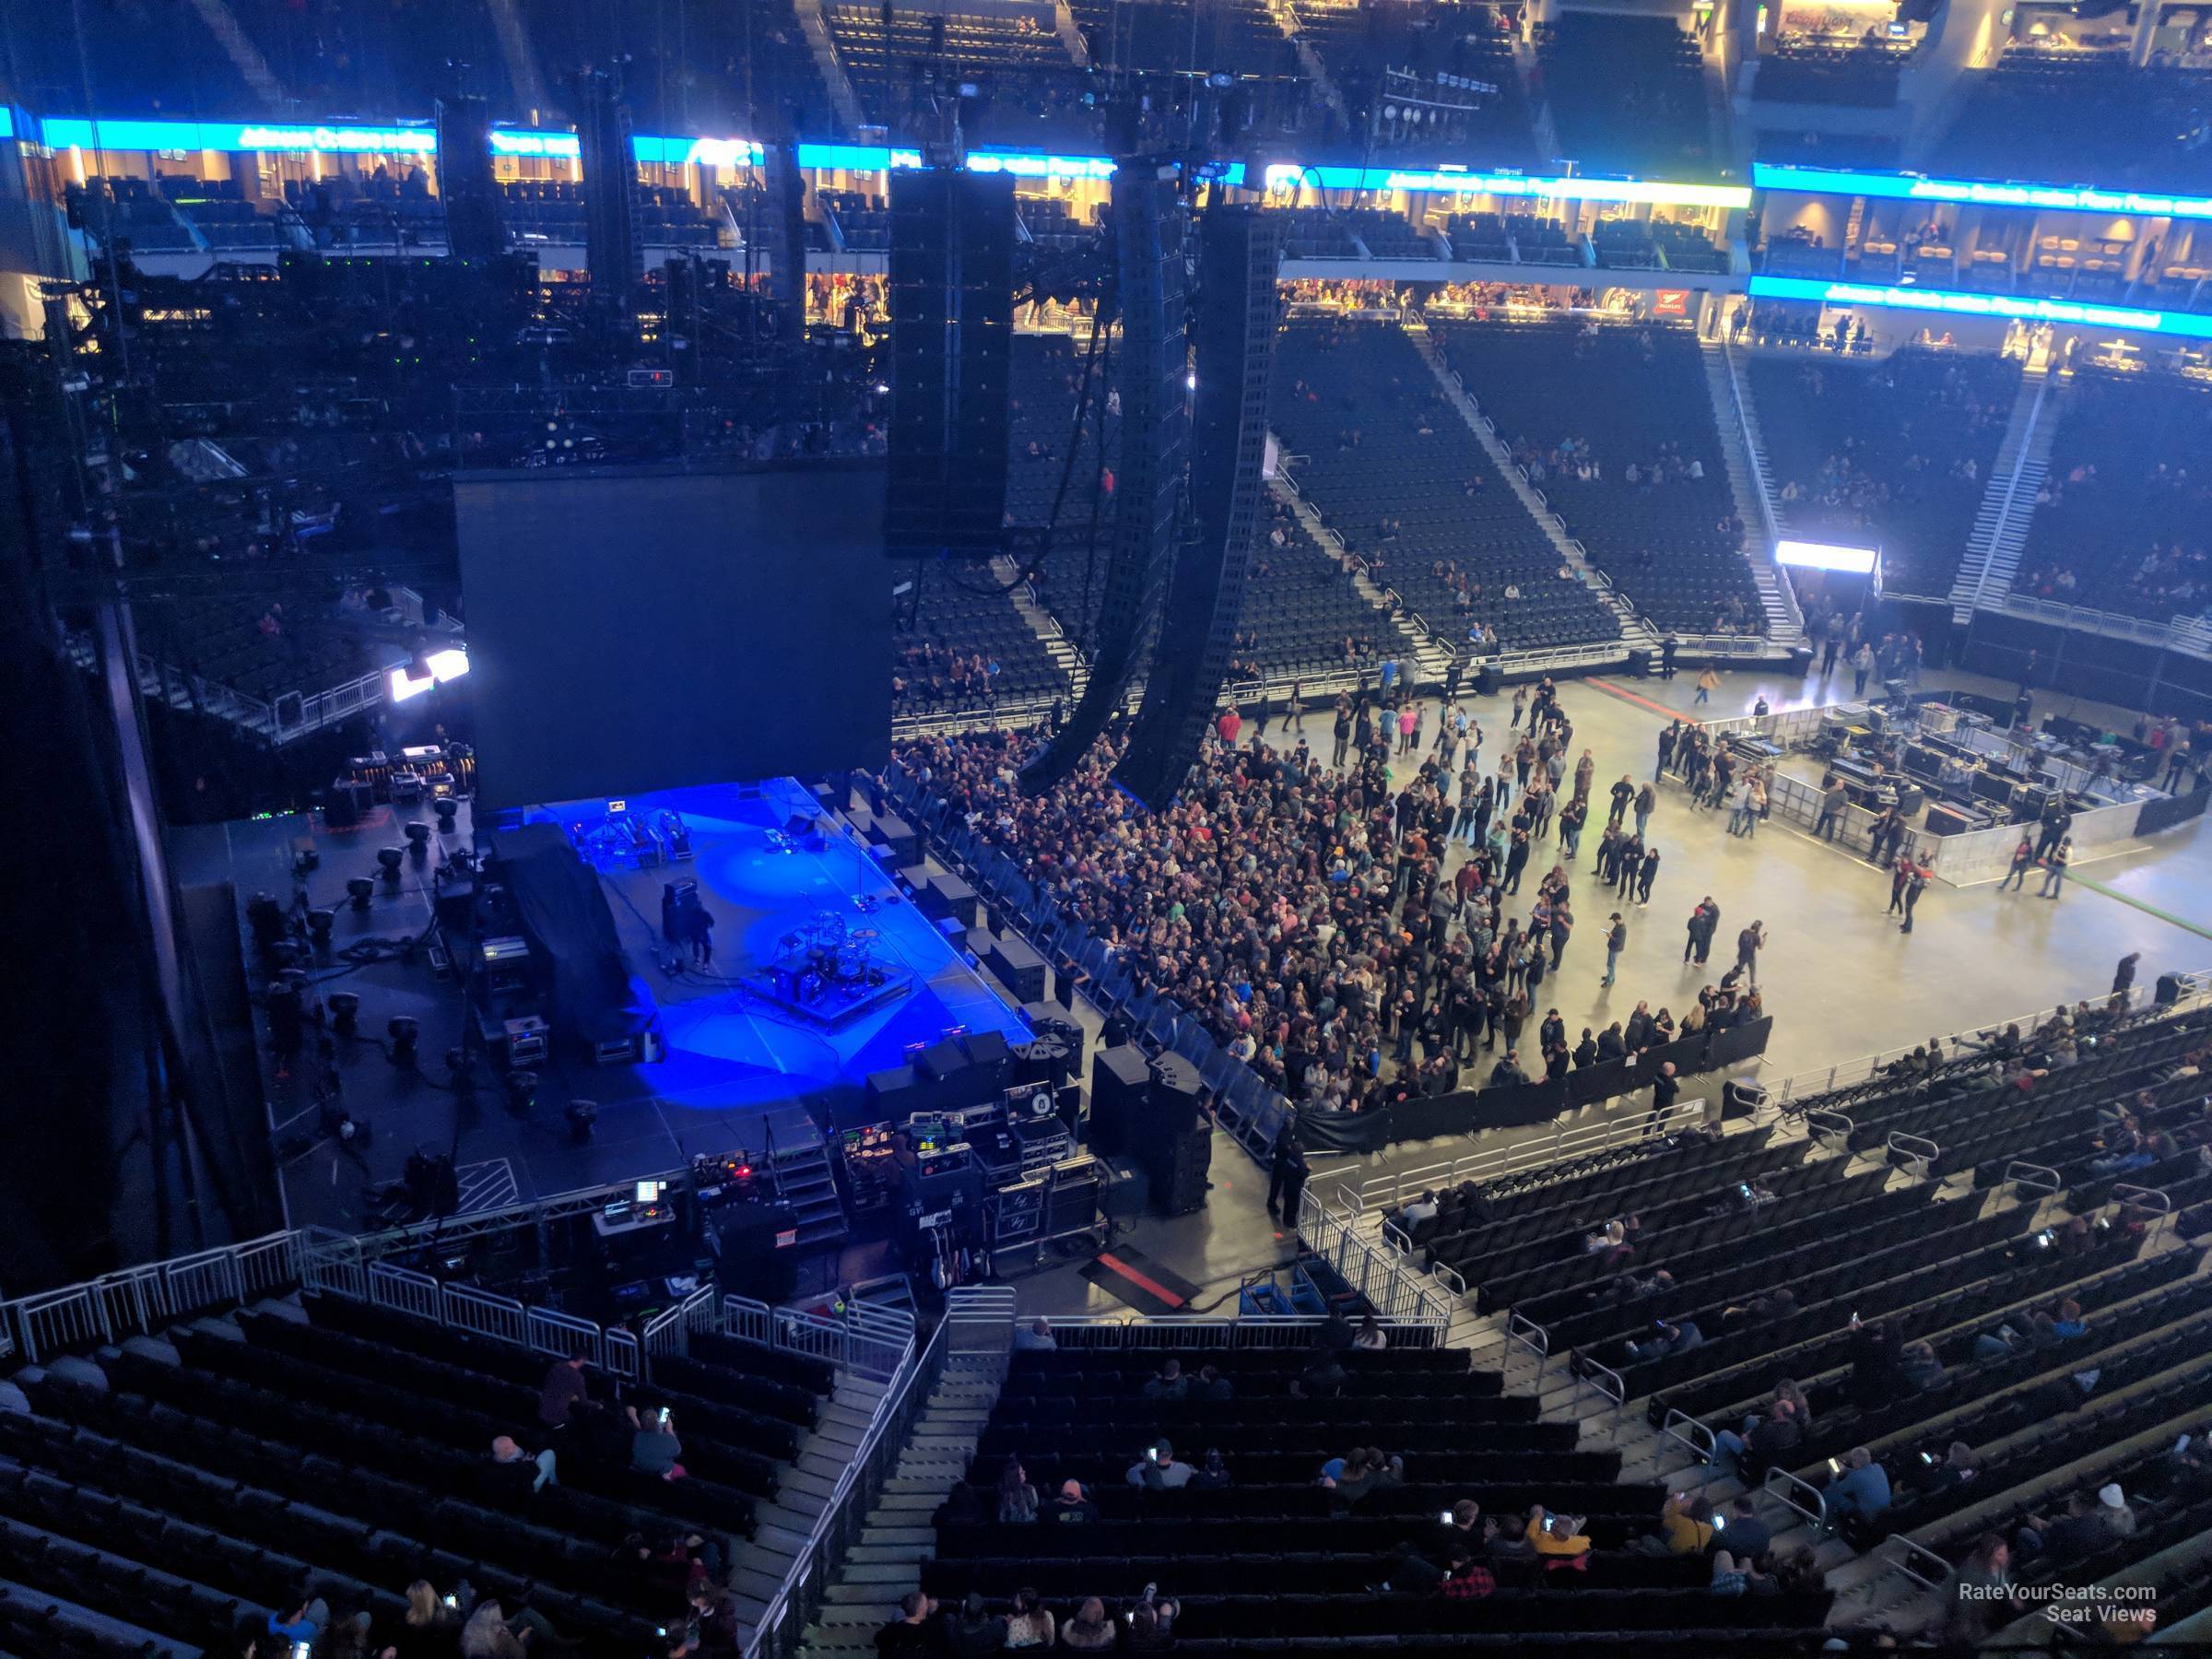 section 211, row 3 seat view  for concert - fiserv forum